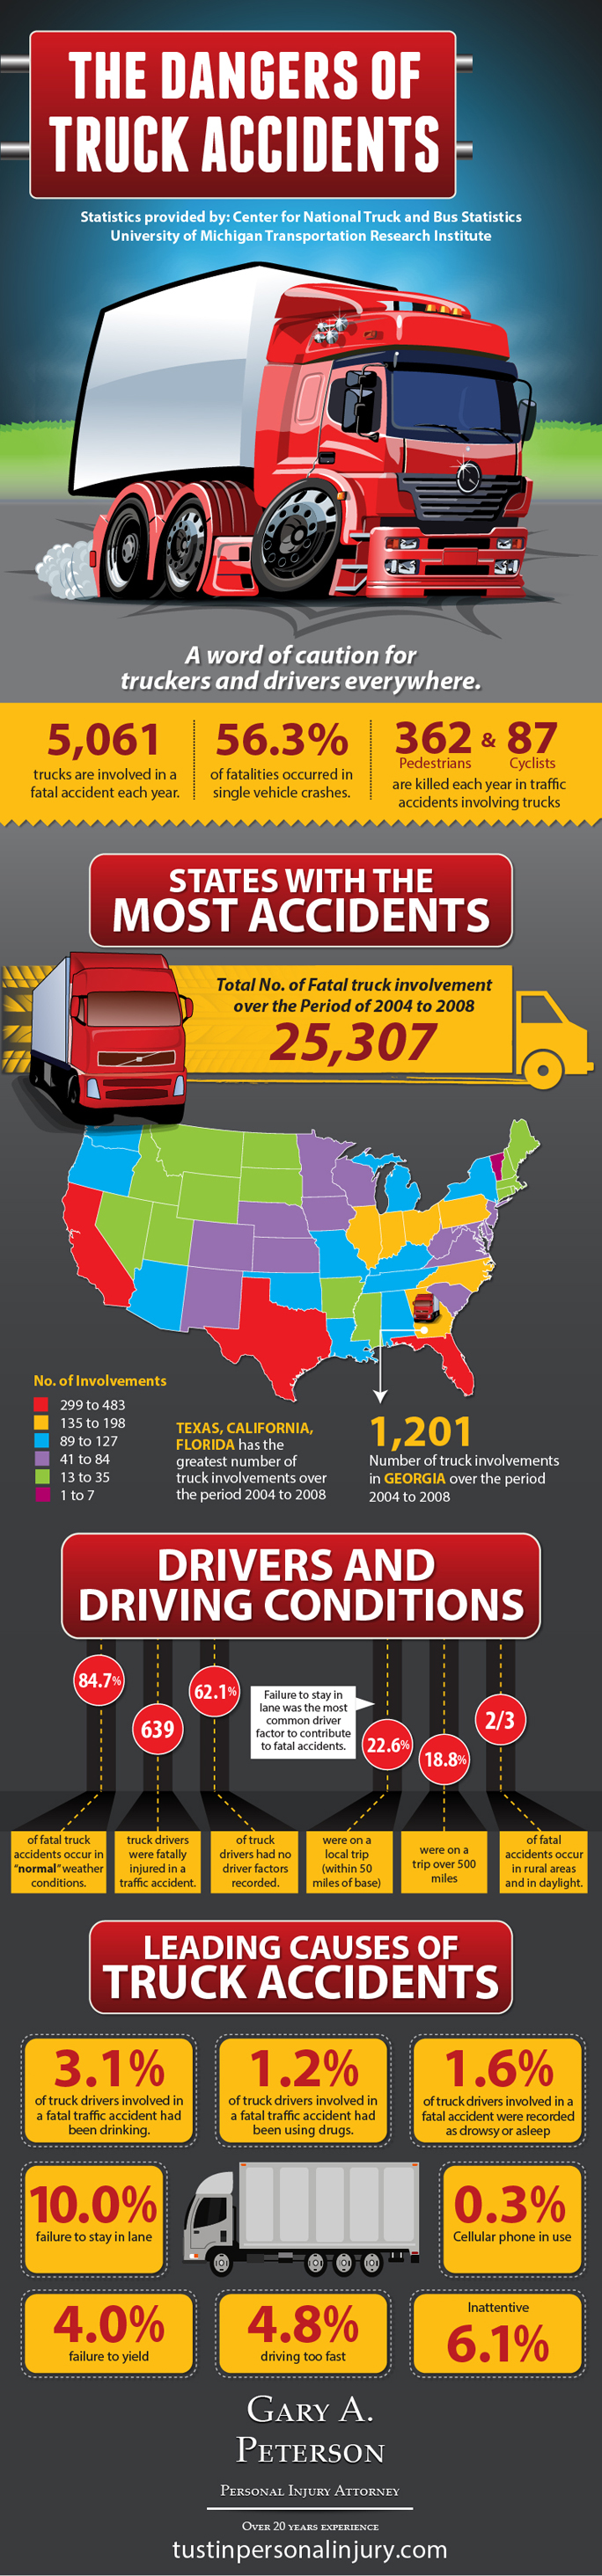 Dangers of Truck Accidents Infographic | Tustin Personal Injury Attorney